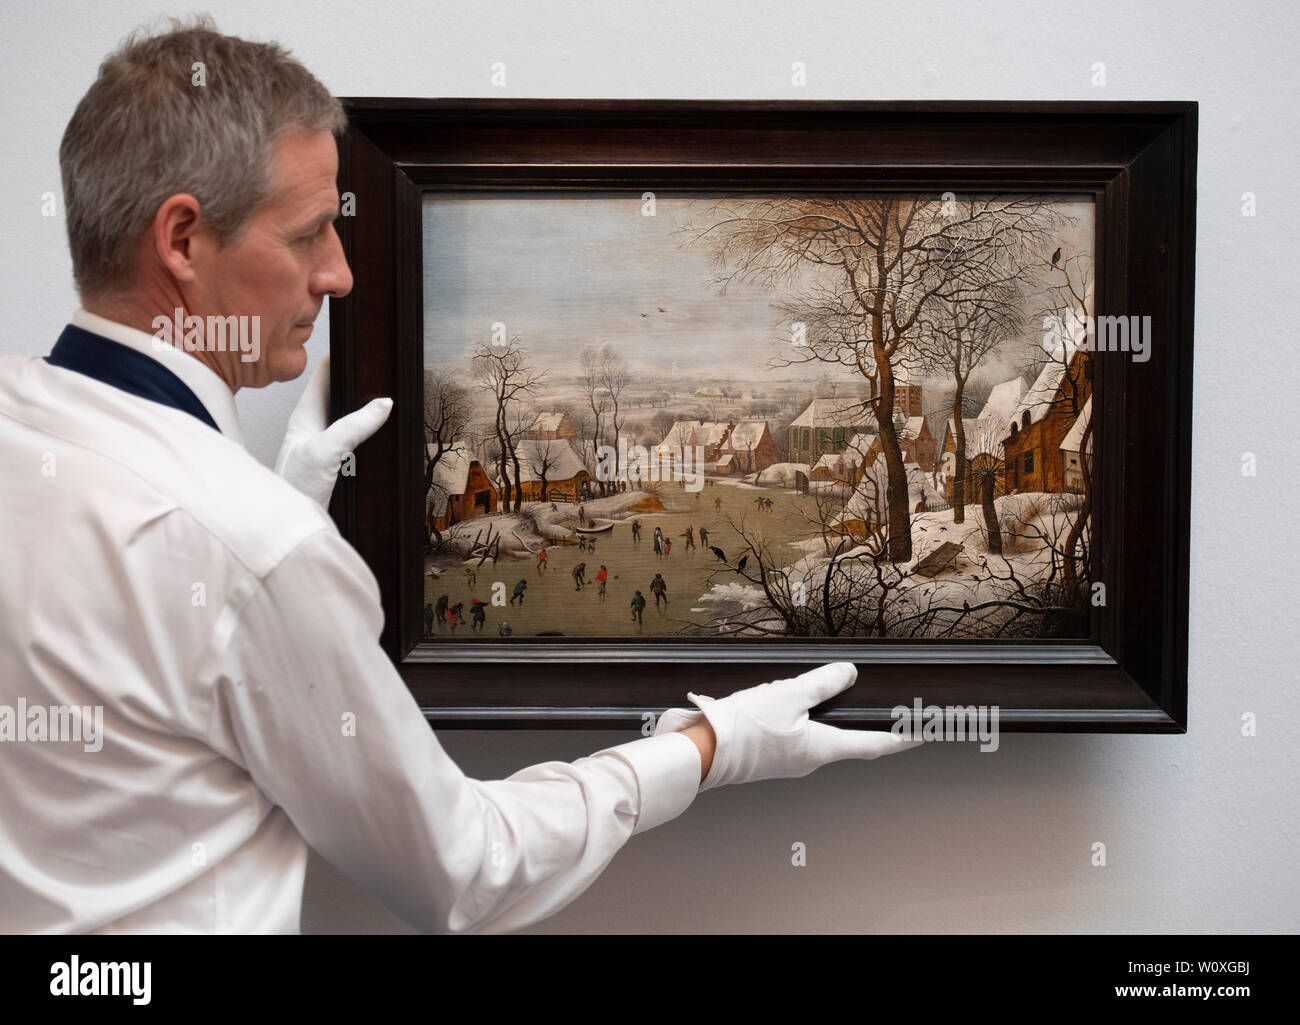 Sotheby’s, London, UK. 28th June 2019. Major works by Botticelli, Brueghel, Rubens and landscapes by Gainsborough, Turner and Constable in one of the most valuable Old Masters sales ever staged, to take place on 3 July 2019. Image: Pieter Brueghel the Younger, Winter Landscape with a bird trap. Estimate £1.5-2 million. Credit: Malcolm Park/Alamy Live News. Stock Photo